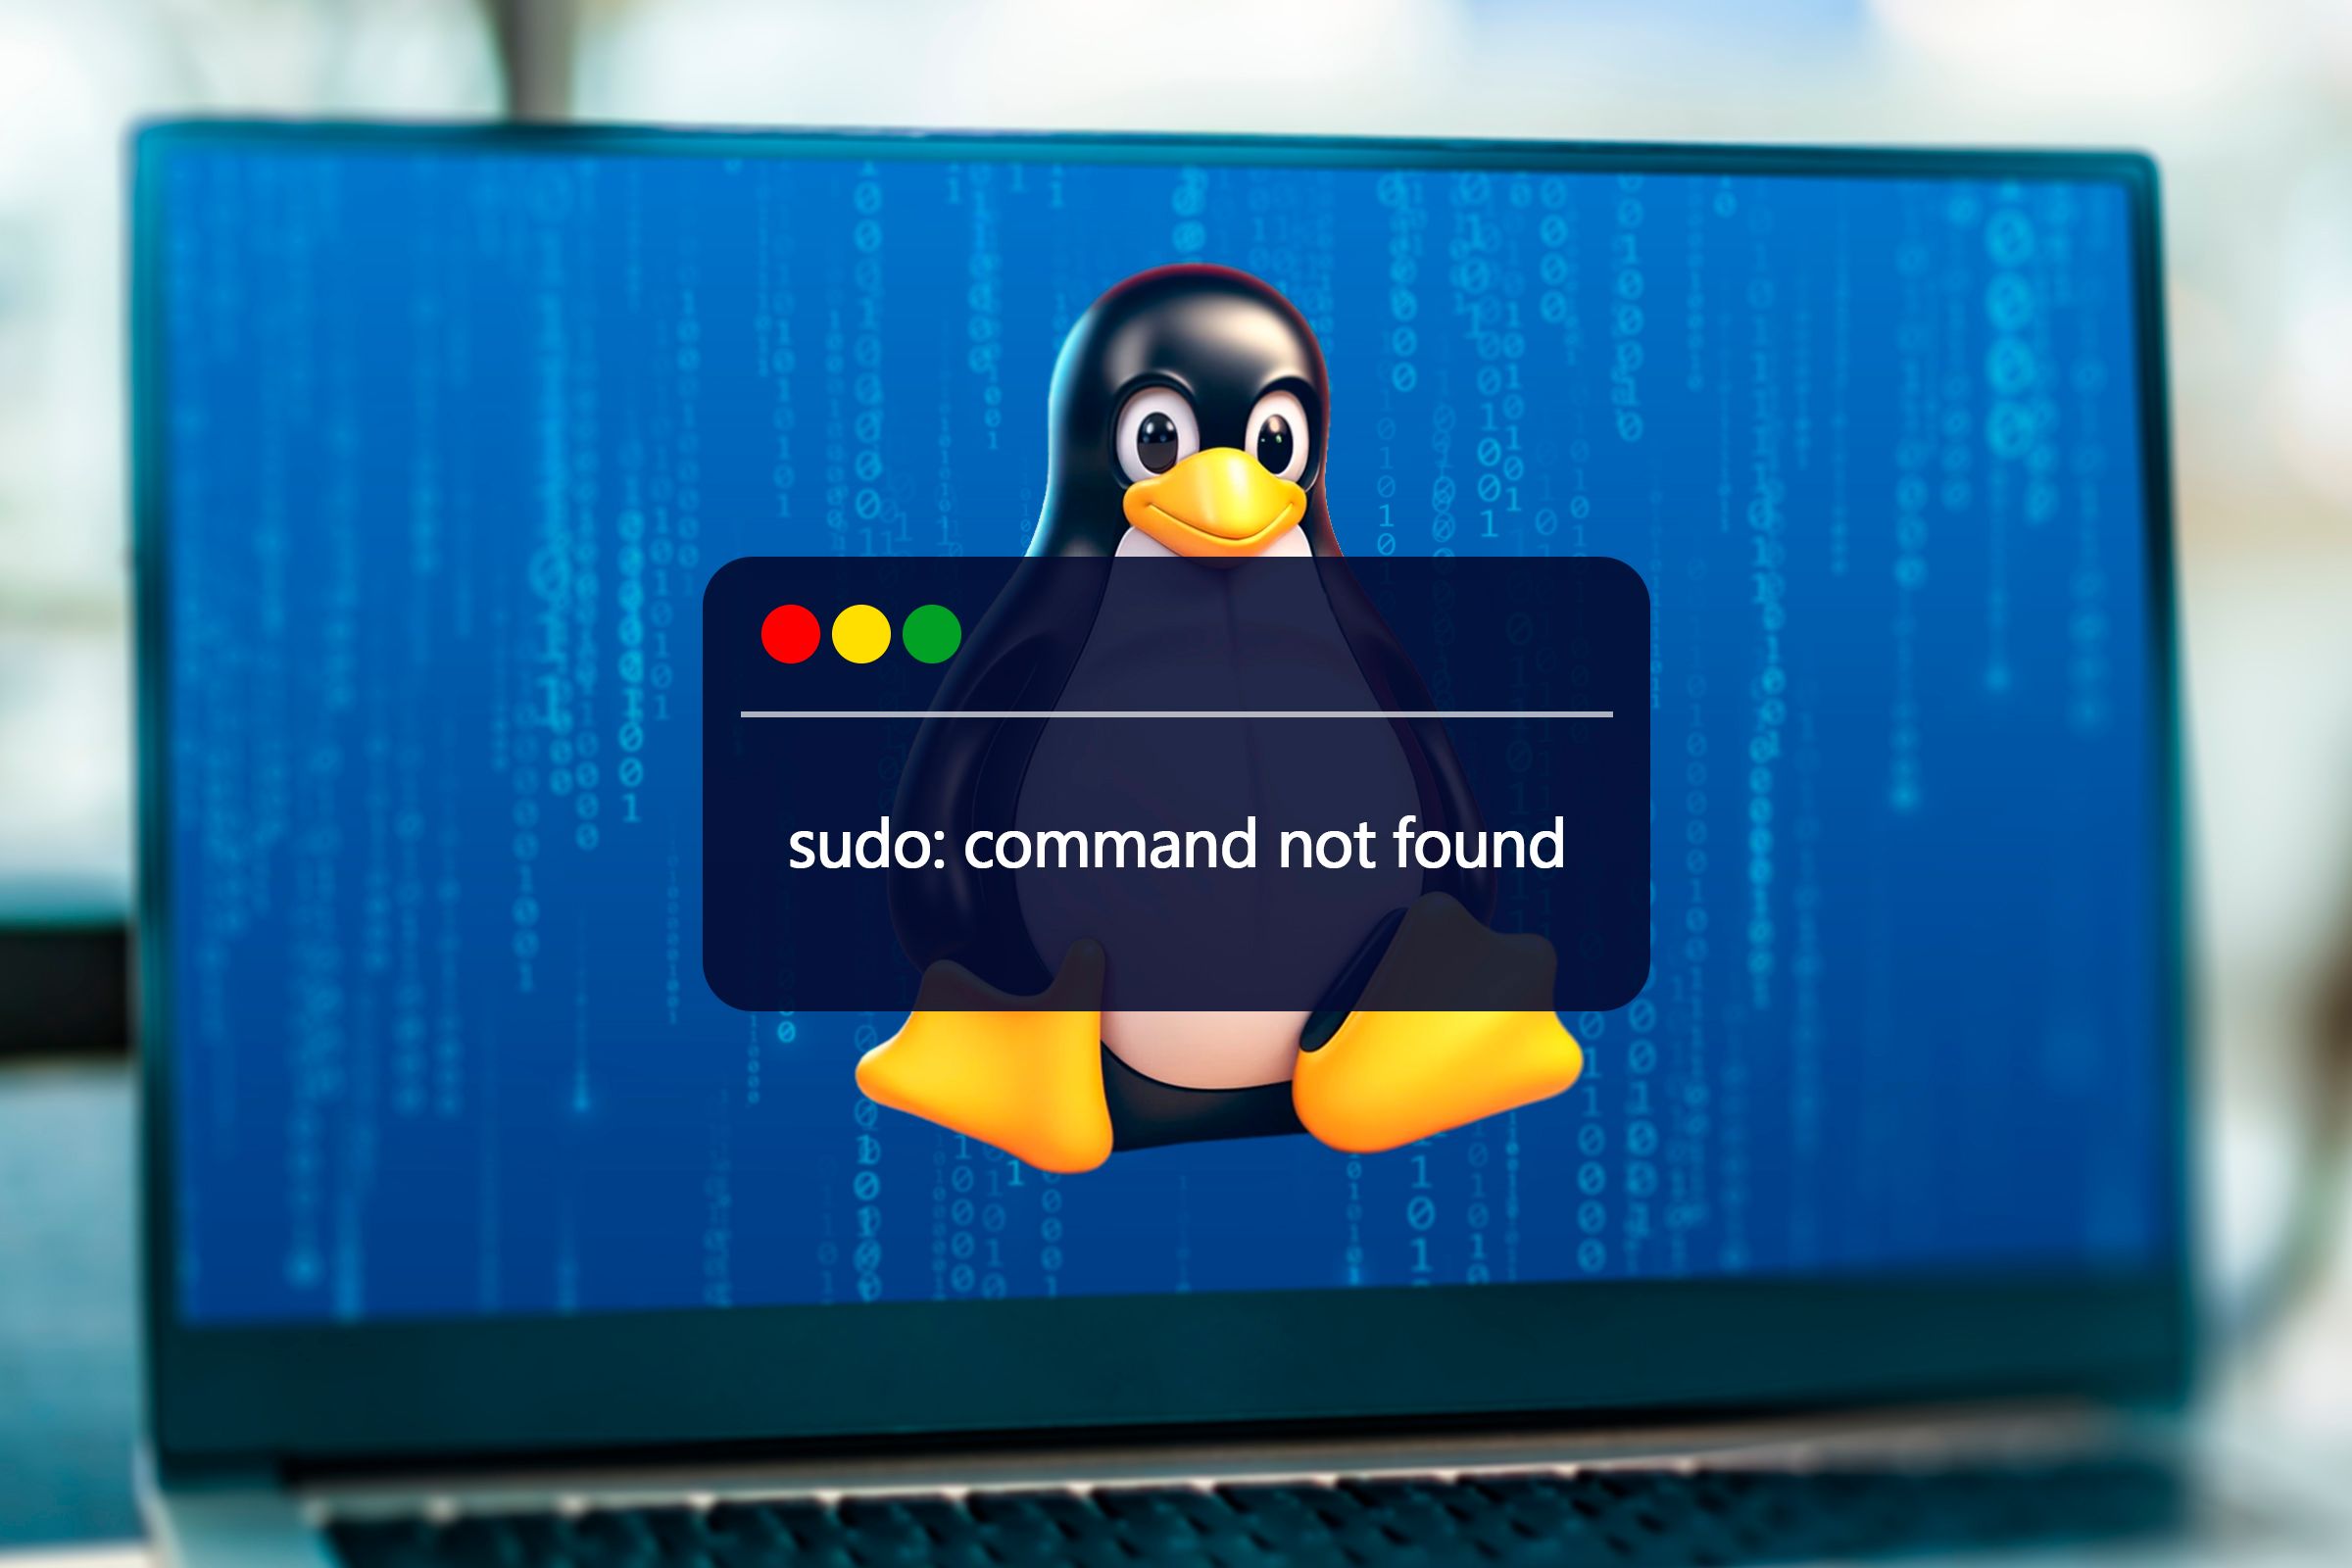 Example of a terminal with the error 'sudo command not found' and a notebook with the Linux mascot on the screen